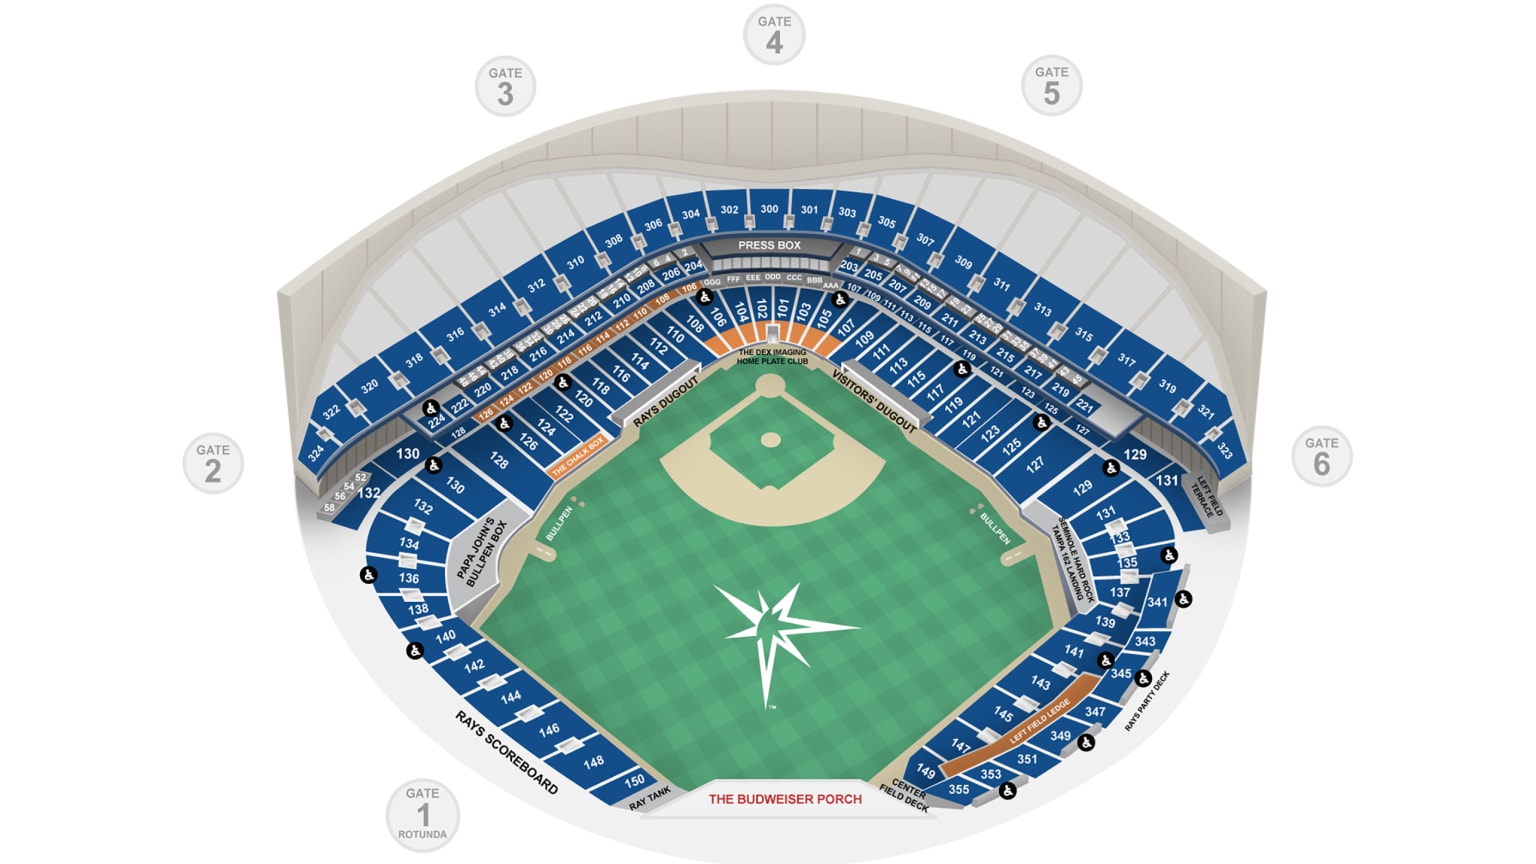 Tropicana Field ground rules, explained: Why home runs count when